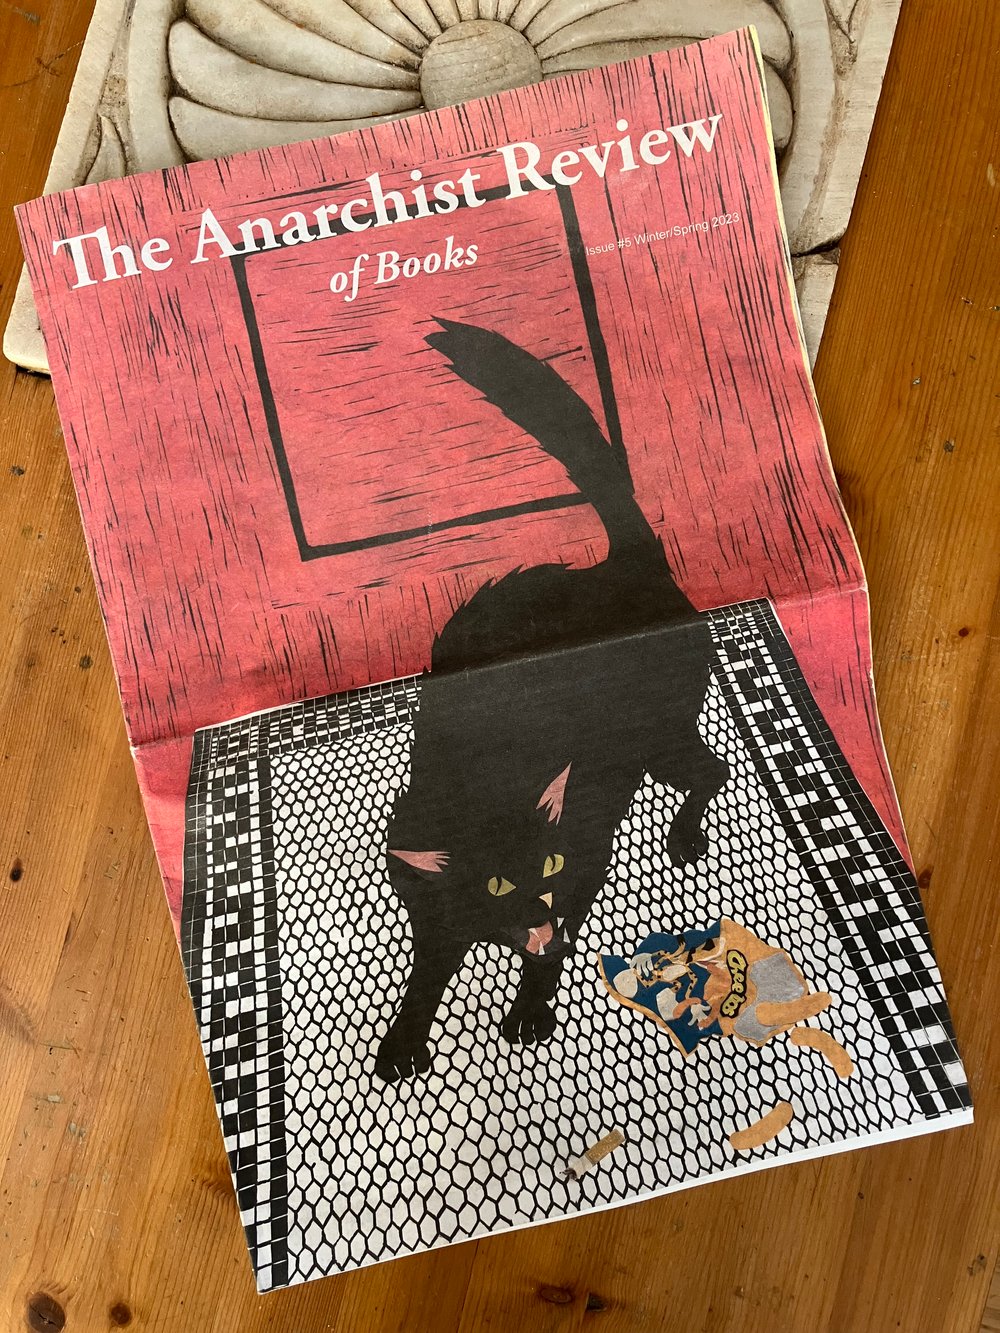 Anarchist Review of Books #5